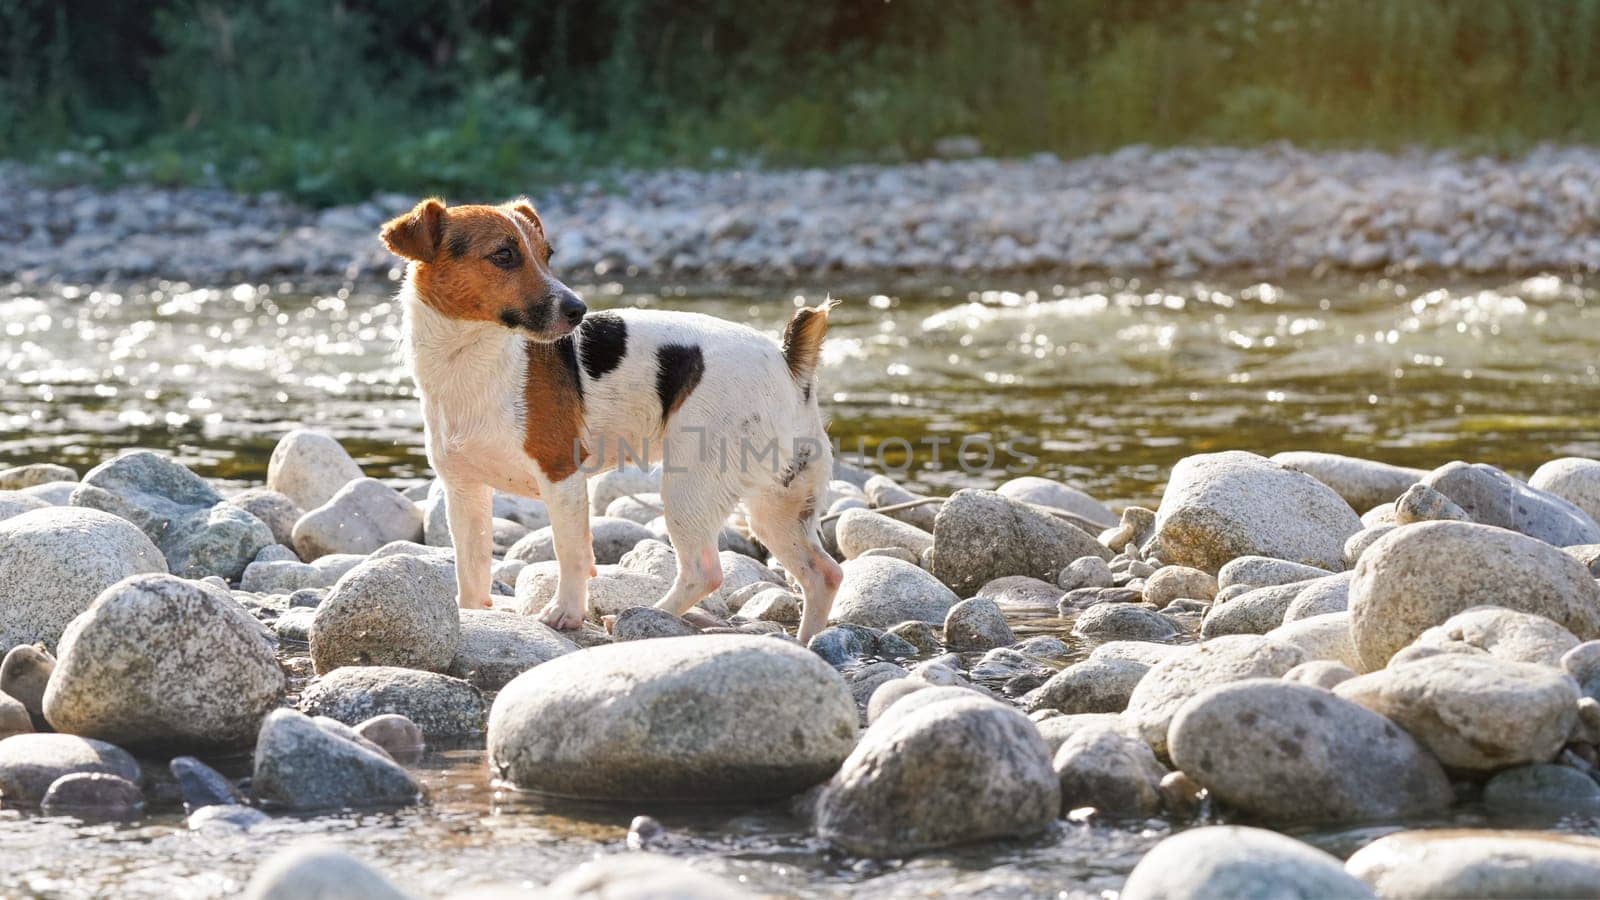 Small Jack Russell terrier walks over round stones near river on sunny day by Ivanko